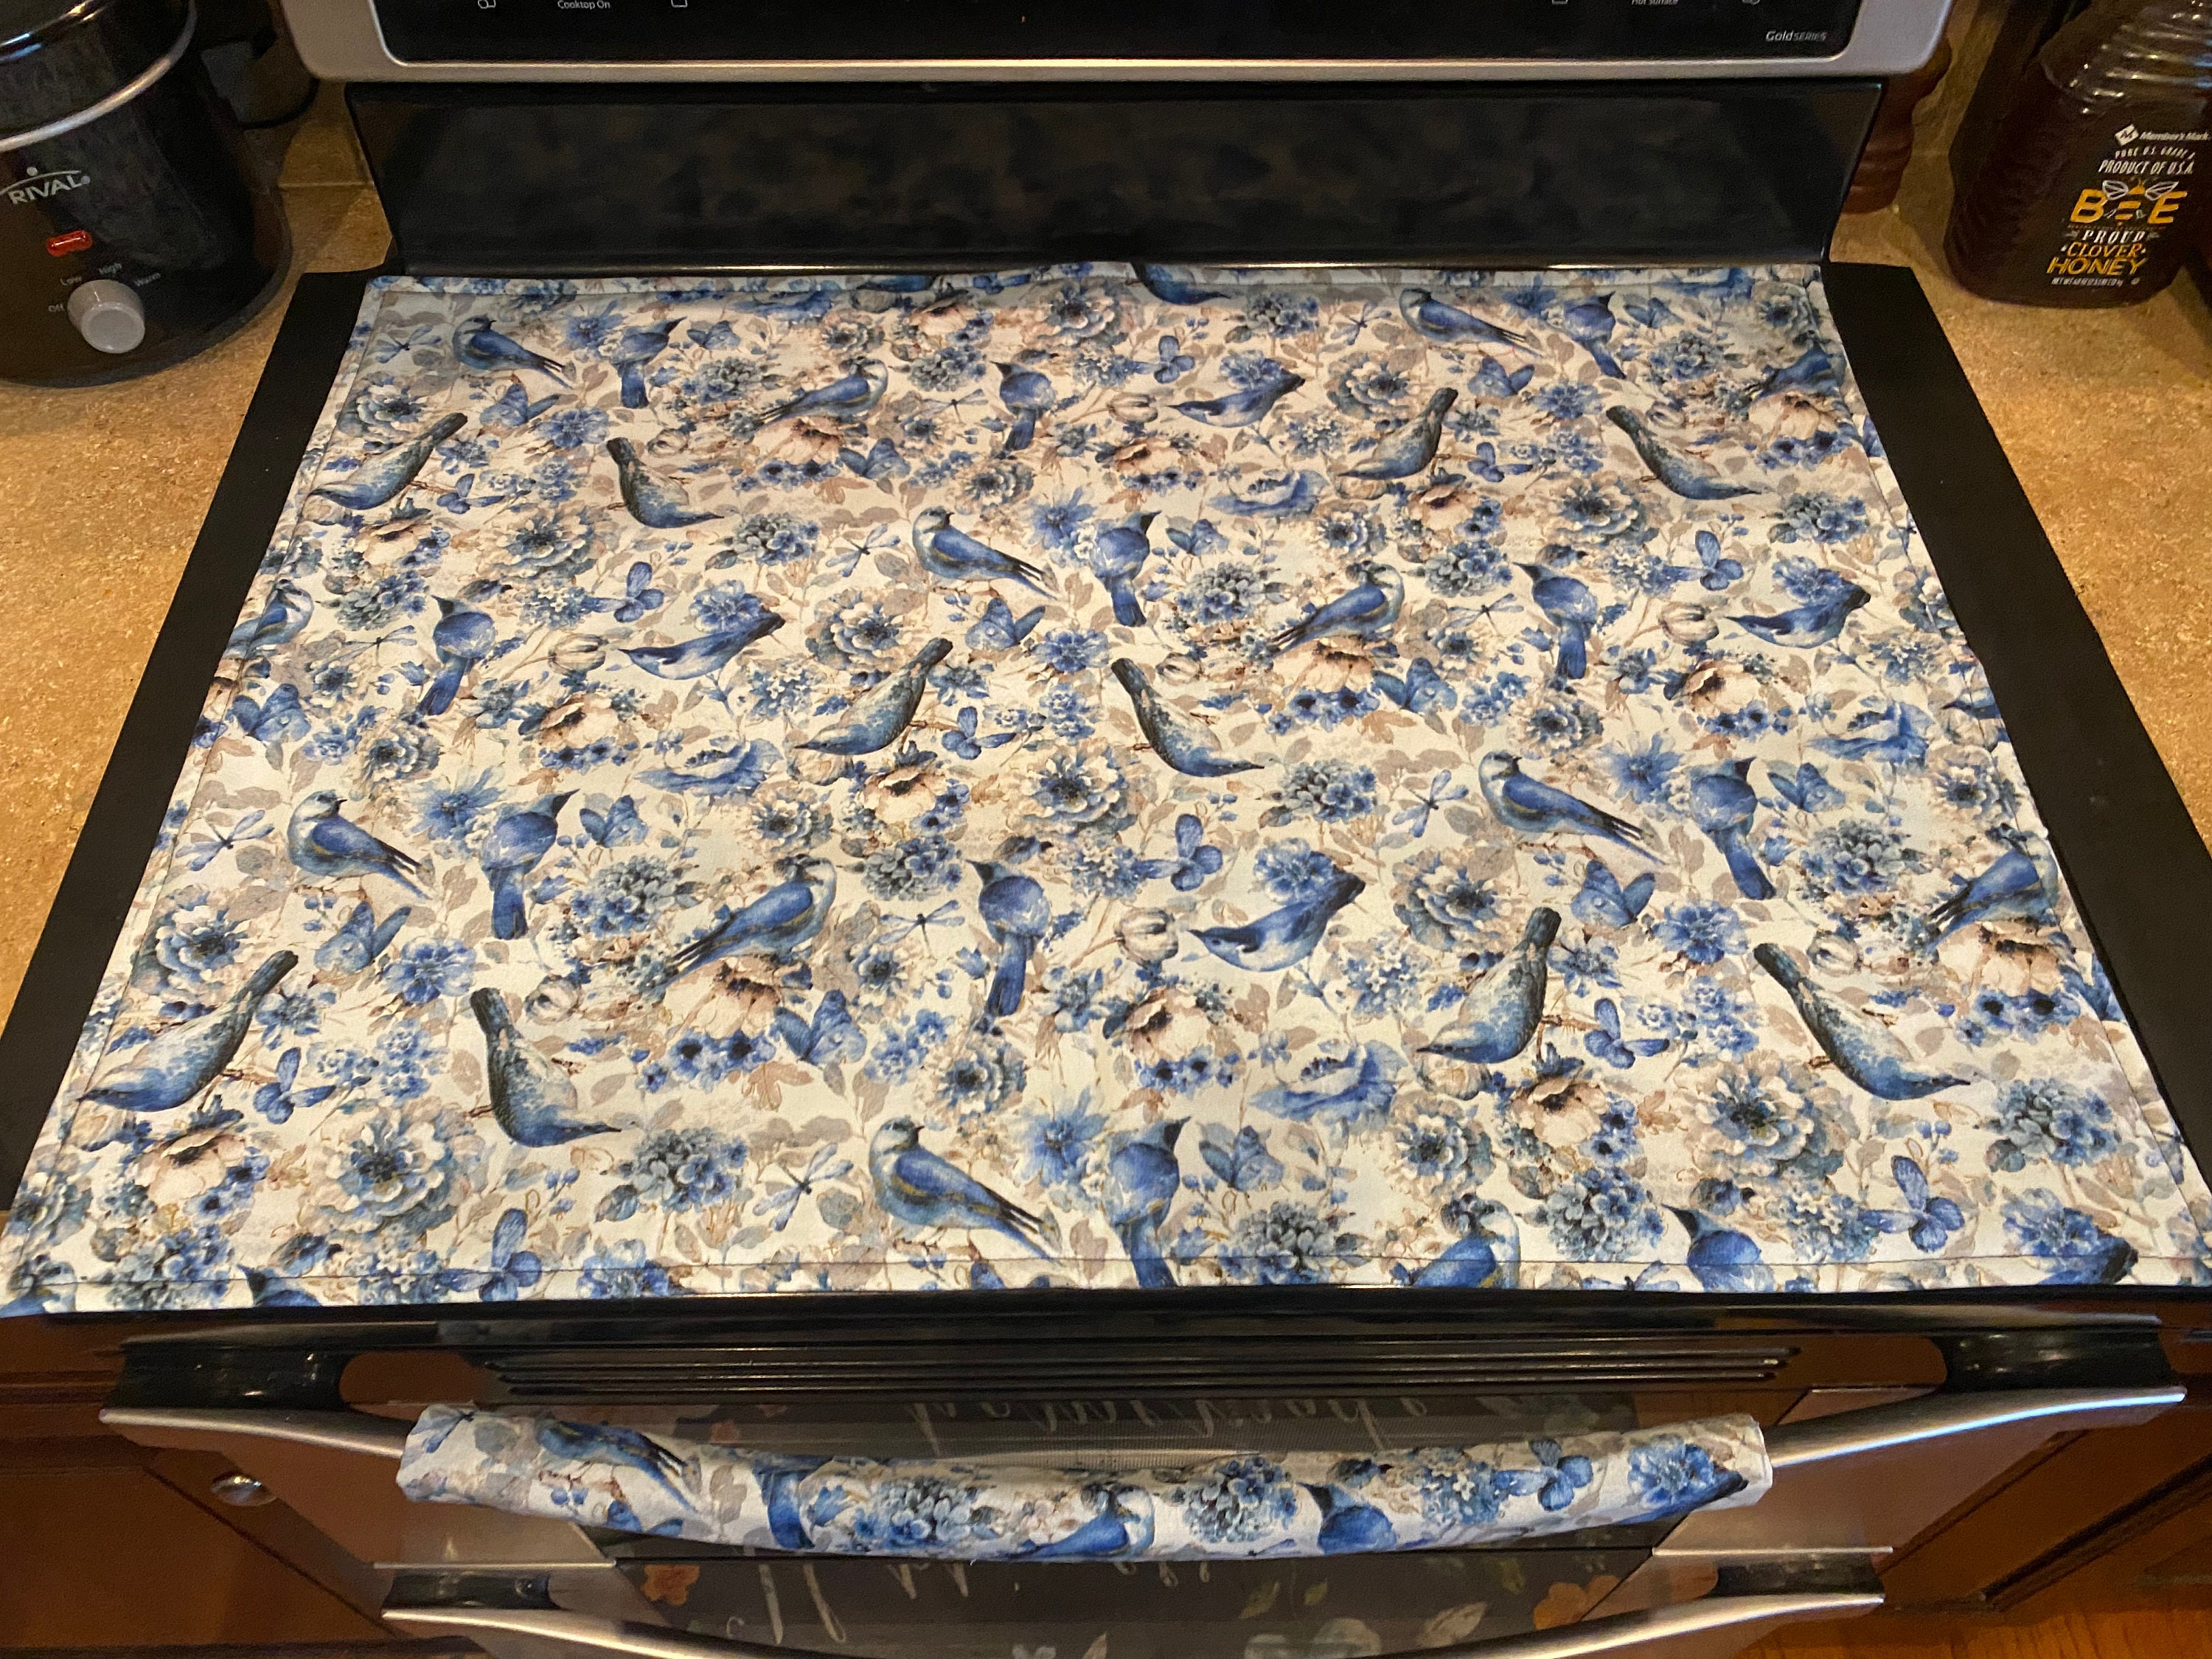 Blue Bird Stove Top Cover With or Without Oven Handle That